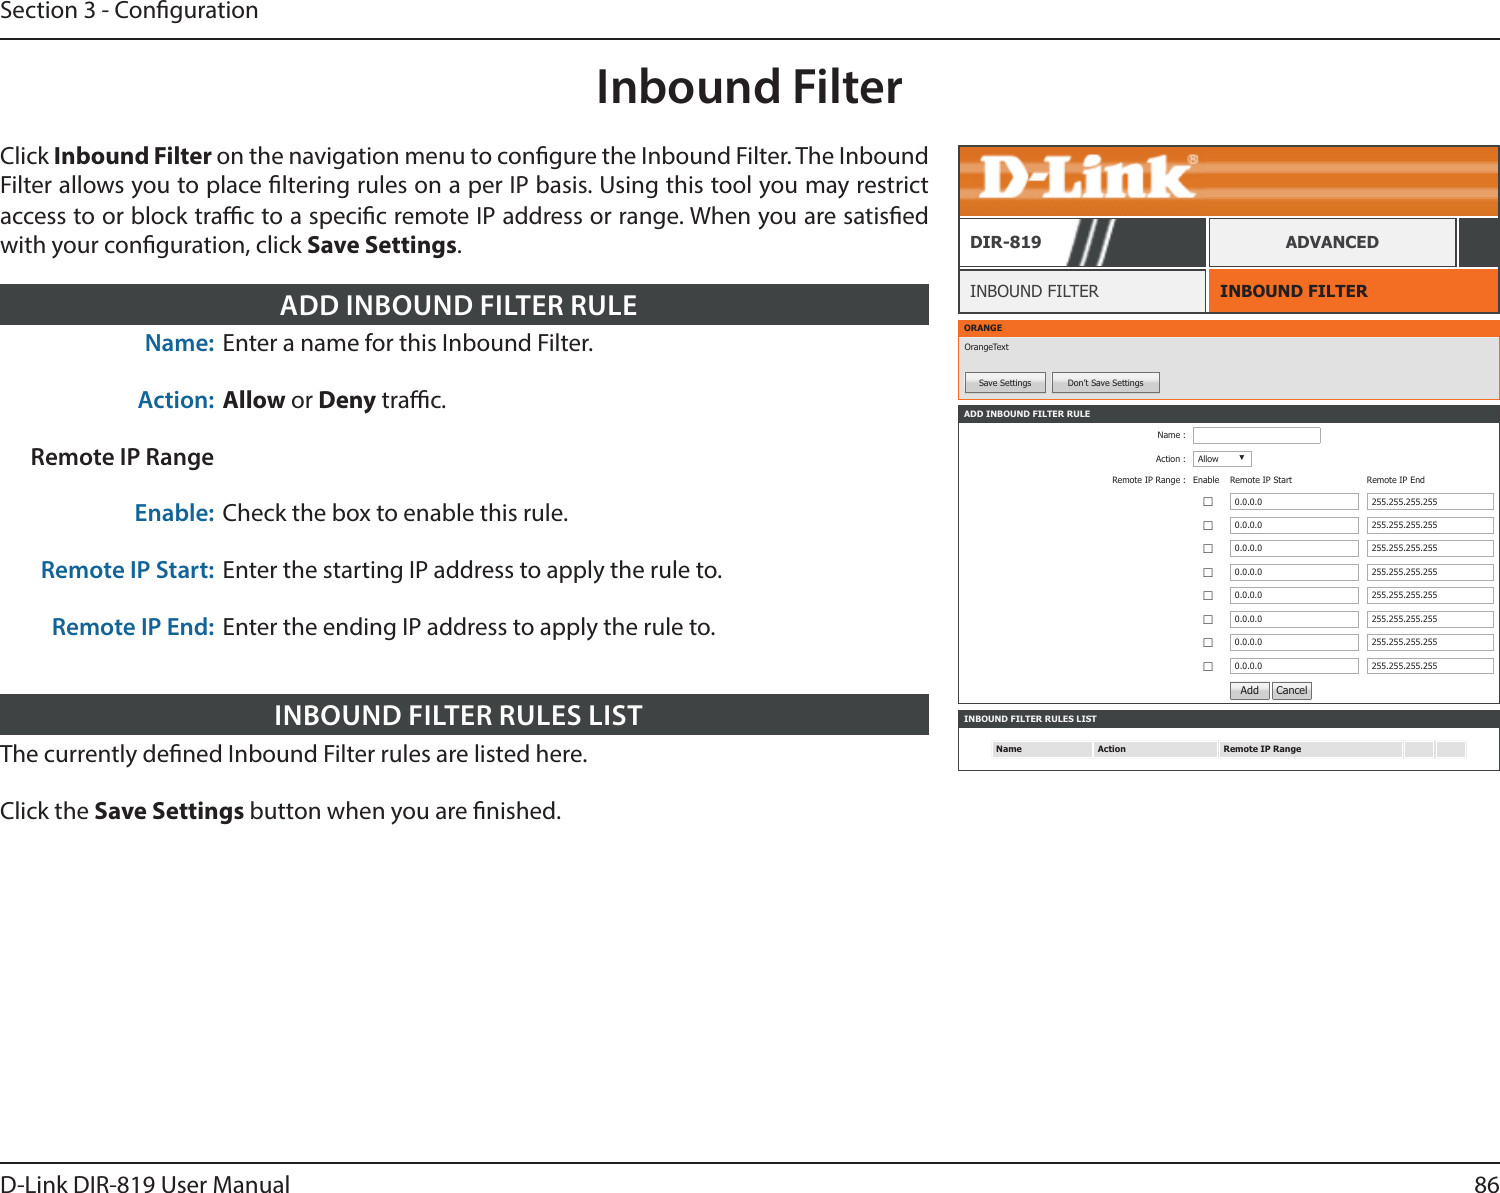 86D-Link DIR-819 User ManualSection 3 - CongurationInbound FilterINBOUND FILTERINBOUND FILTERDIR-819 ADVANCEDClick Inbound Filter on the navigation menu to congure the Inbound Filter. The Inbound Filter allows you to place ltering rules on a per IP basis. Using this tool you may restrict access to or block trac to a specic remote IP address or range. When you are satised with your conguration, click Save Settings.ORANGEOrangeTextSave Settings Don’t Save SettingsINBOUND FILTER RULES LISTName Action Remote IP RangeADD INBOUND FILTER RULEName :Action : Allow ▼Remote IP Range : Enable  Remote IP Start Remote IP End ☐0.0.0.0 255.255.255.255☐0.0.0.0 255.255.255.255☐0.0.0.0 255.255.255.255☐0.0.0.0 255.255.255.255☐0.0.0.0 255.255.255.255☐0.0.0.0 255.255.255.255☐0.0.0.0 255.255.255.255☐0.0.0.0 255.255.255.255Add  CancelThe currently dened Inbound Filter rules are listed here.Click the Save Settings button when you are nished.INBOUND FILTER RULES LISTName: Enter a name for this Inbound Filter.Action: Allow or Deny trac. Remote IP RangeEnable: Check the box to enable this rule.Remote IP Start: Enter the starting IP address to apply the rule to.Remote IP End: Enter the ending IP address to apply the rule to.ADD INBOUND FILTER RULE